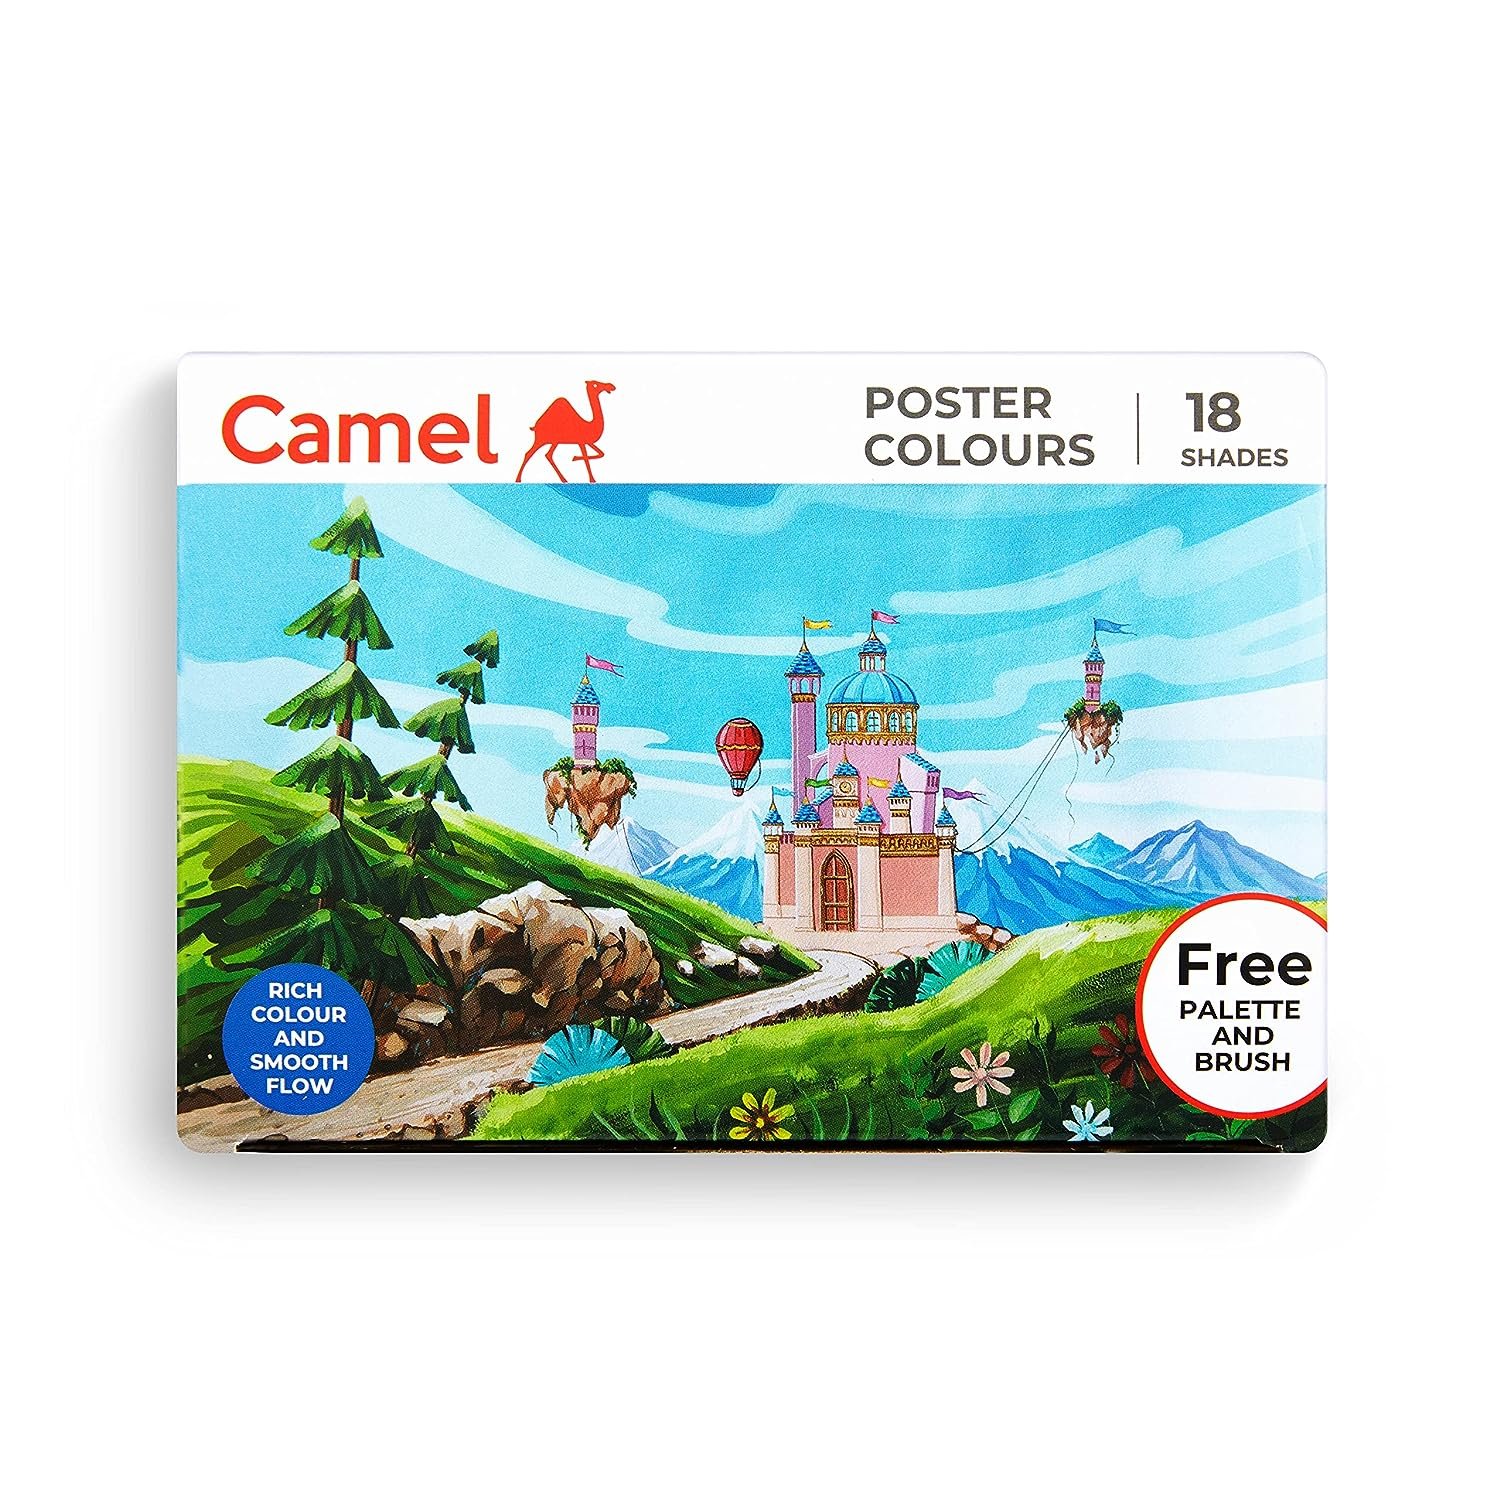 Gift Hub - Camel - Artists' Water Colour Cakes - 18 Shades - Gift Item :  Amazon.in: Home & Kitchen